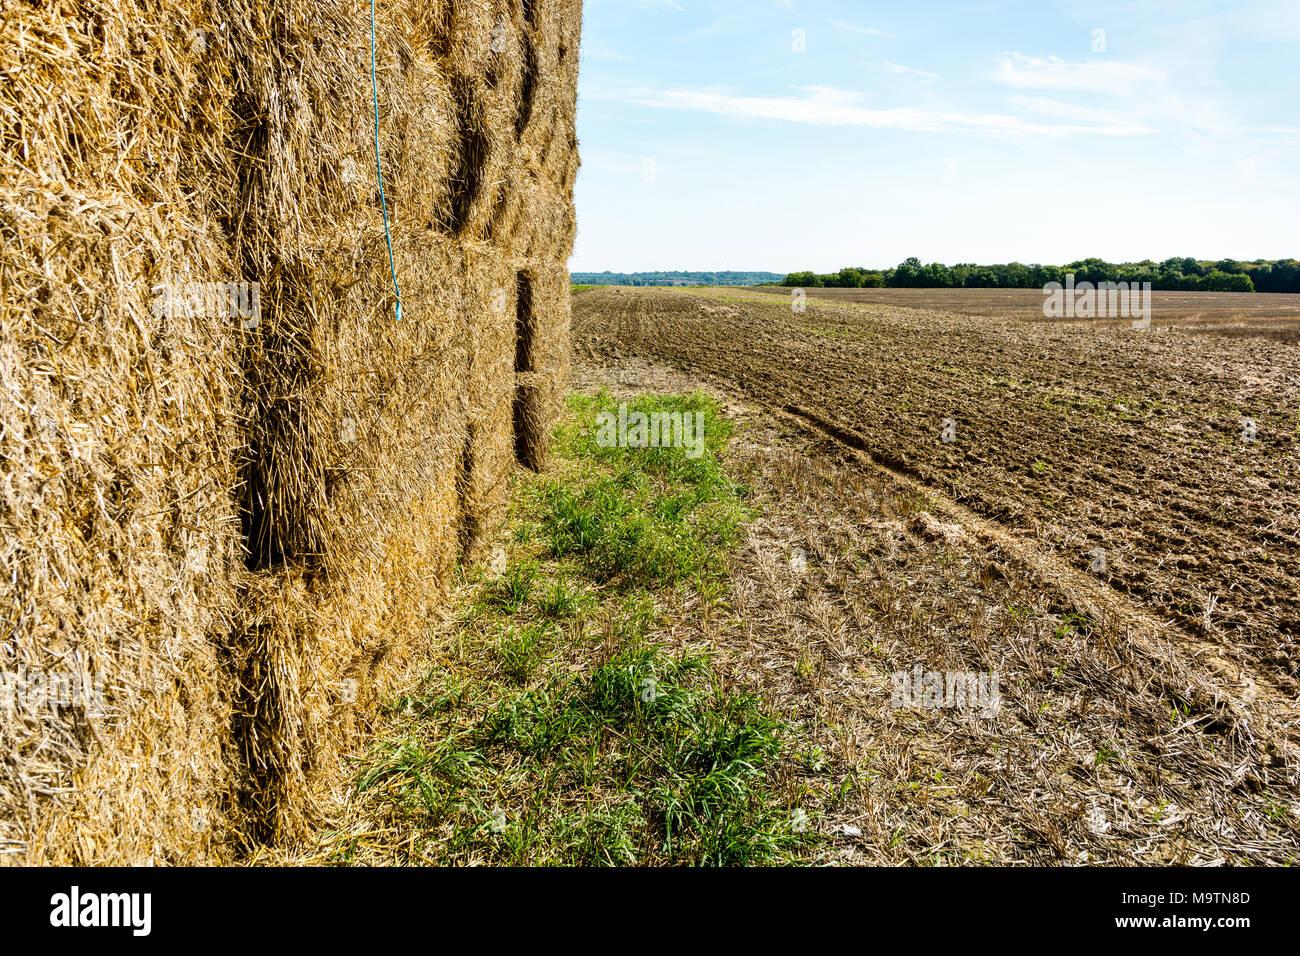 Rectangular bales of straw stacked in a field before being transported to shelter. Stock Photo